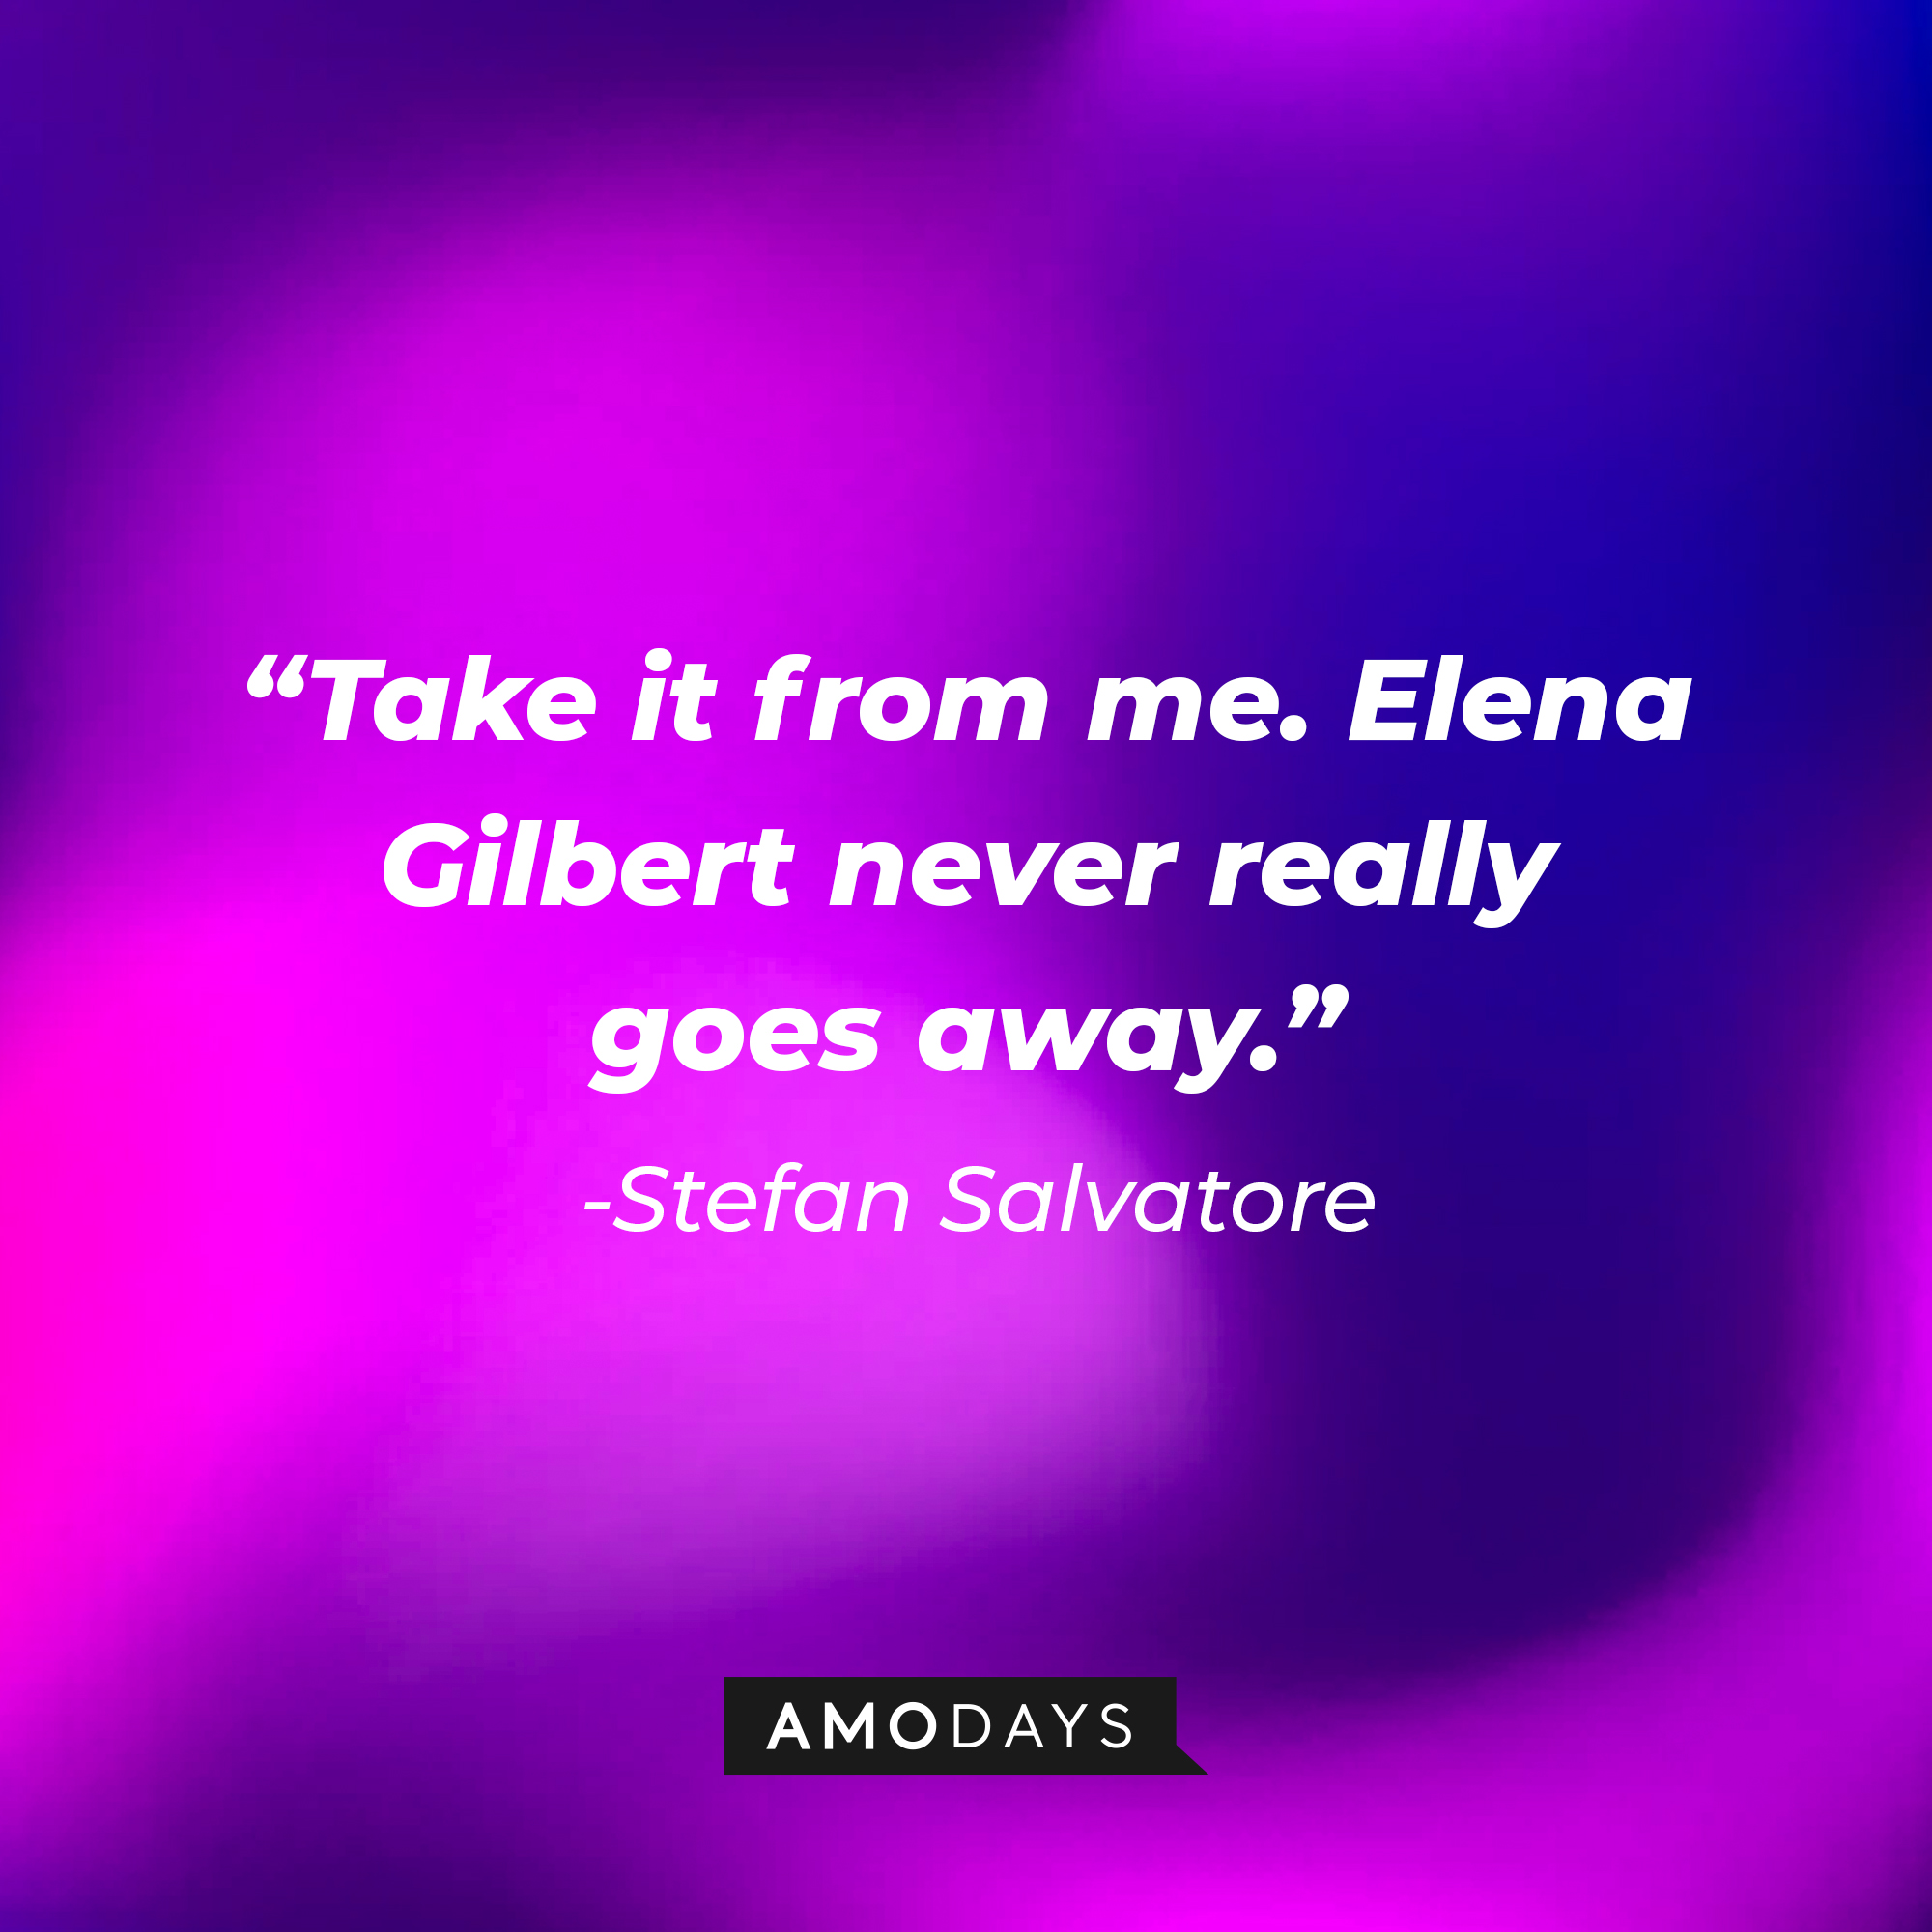 Stefan Salvatore's quote: "Take it from me. Elena Gilbert never really goes away." | Source: AmoDays